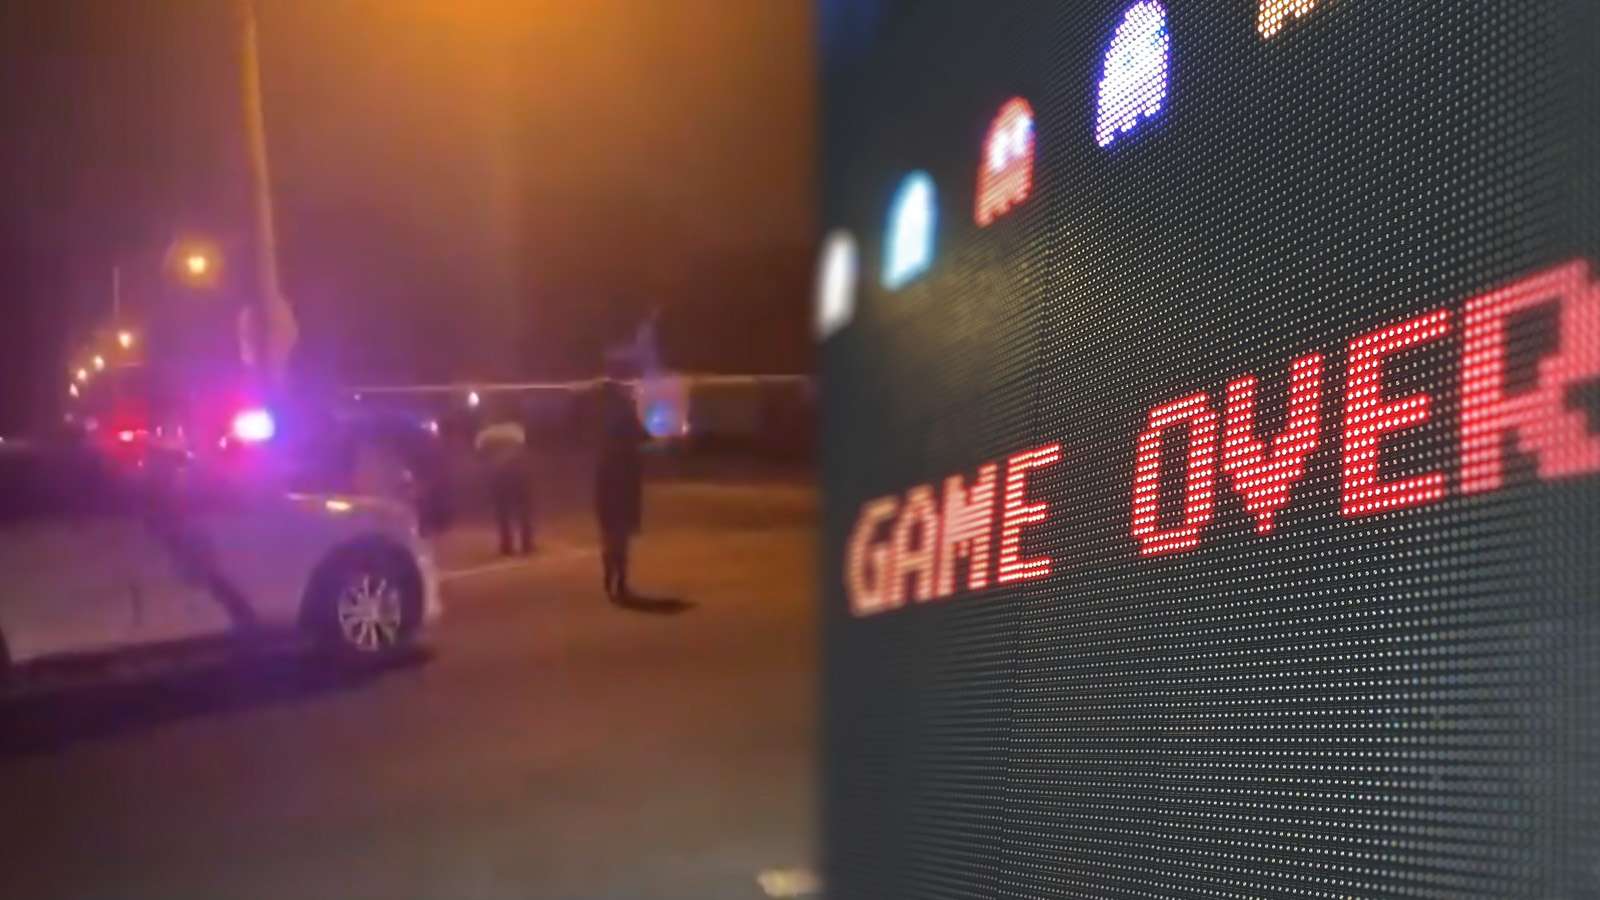 Video game dispute ends in shoot-out with three officers injured